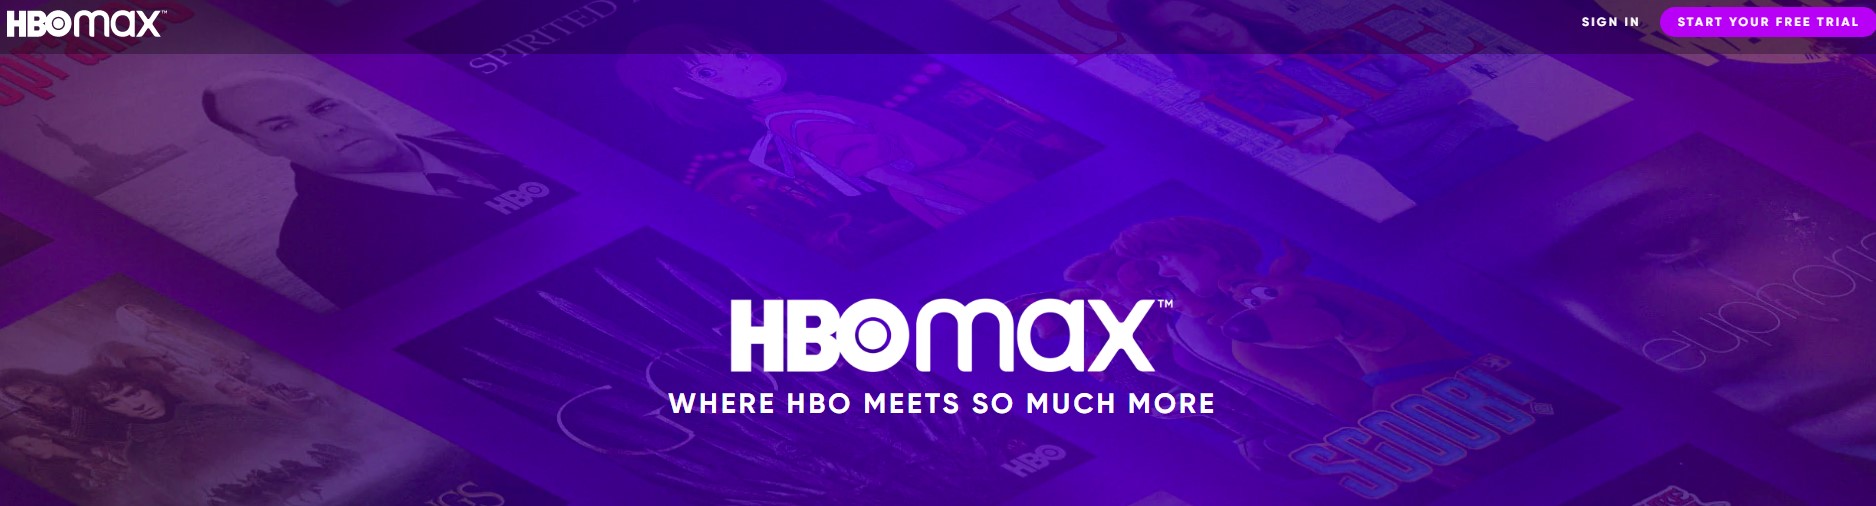 HBO launches HBO Max